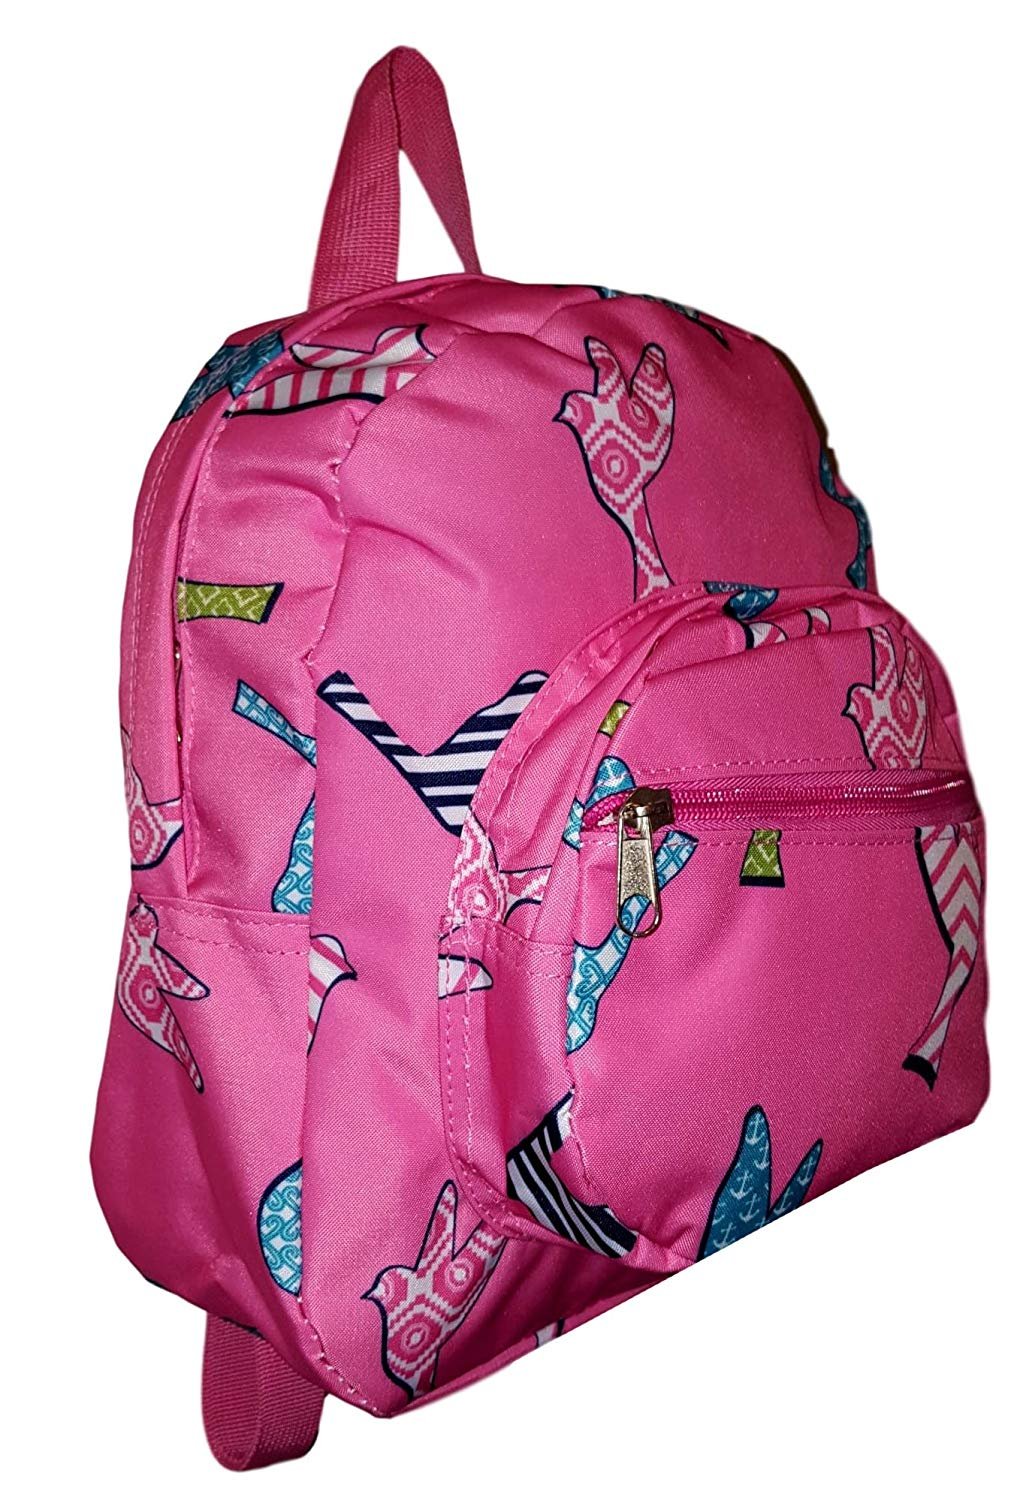 11-inch Mini Backpack Purse, Zipper Front Pockets Teen Child Pink Bird Print - image 1 of 3